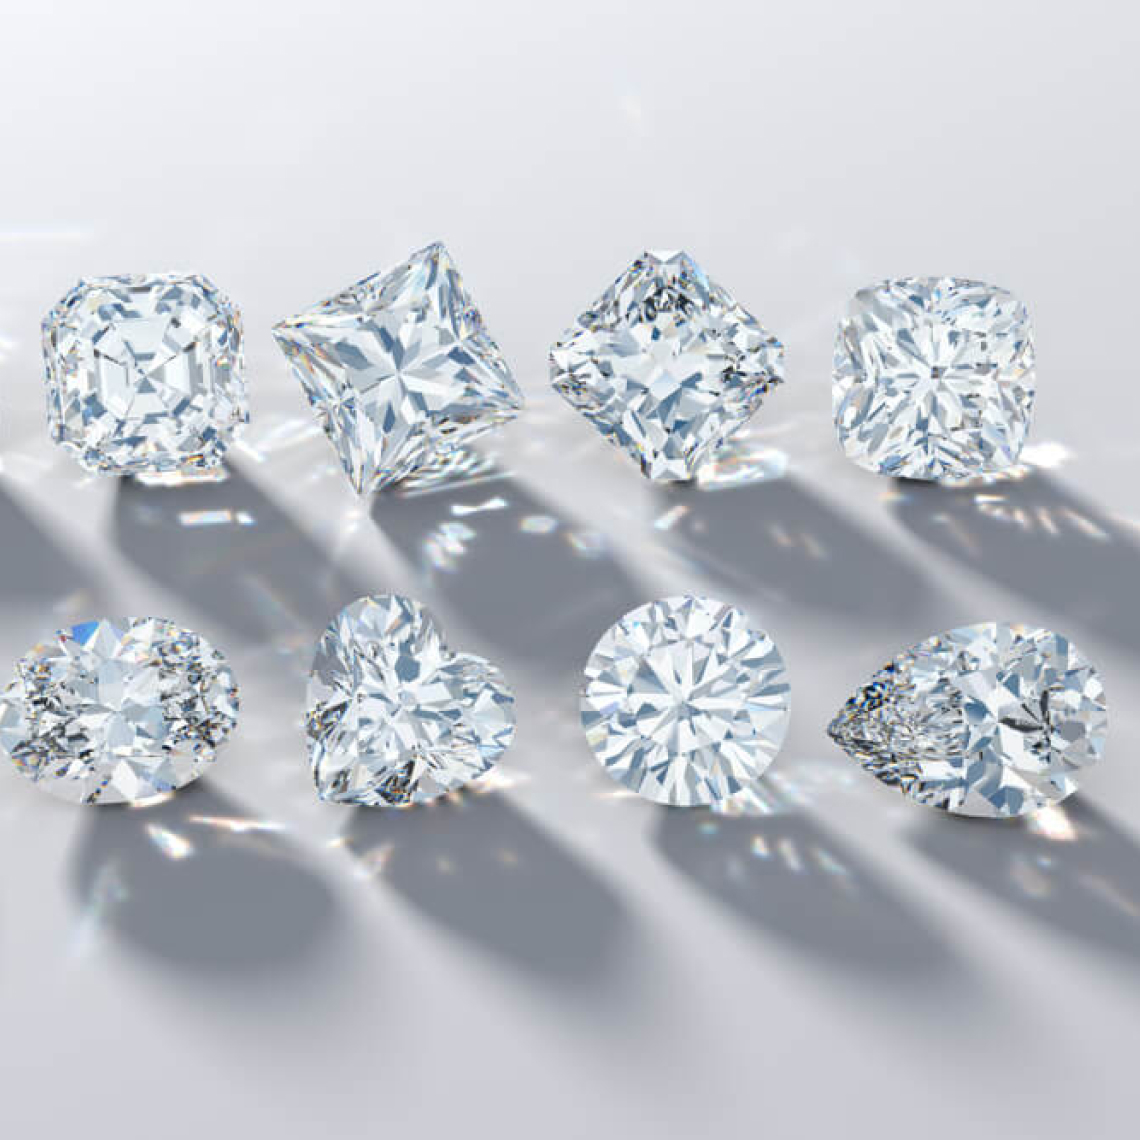 How to Choose the Best Diamond Shape for Your Pendant